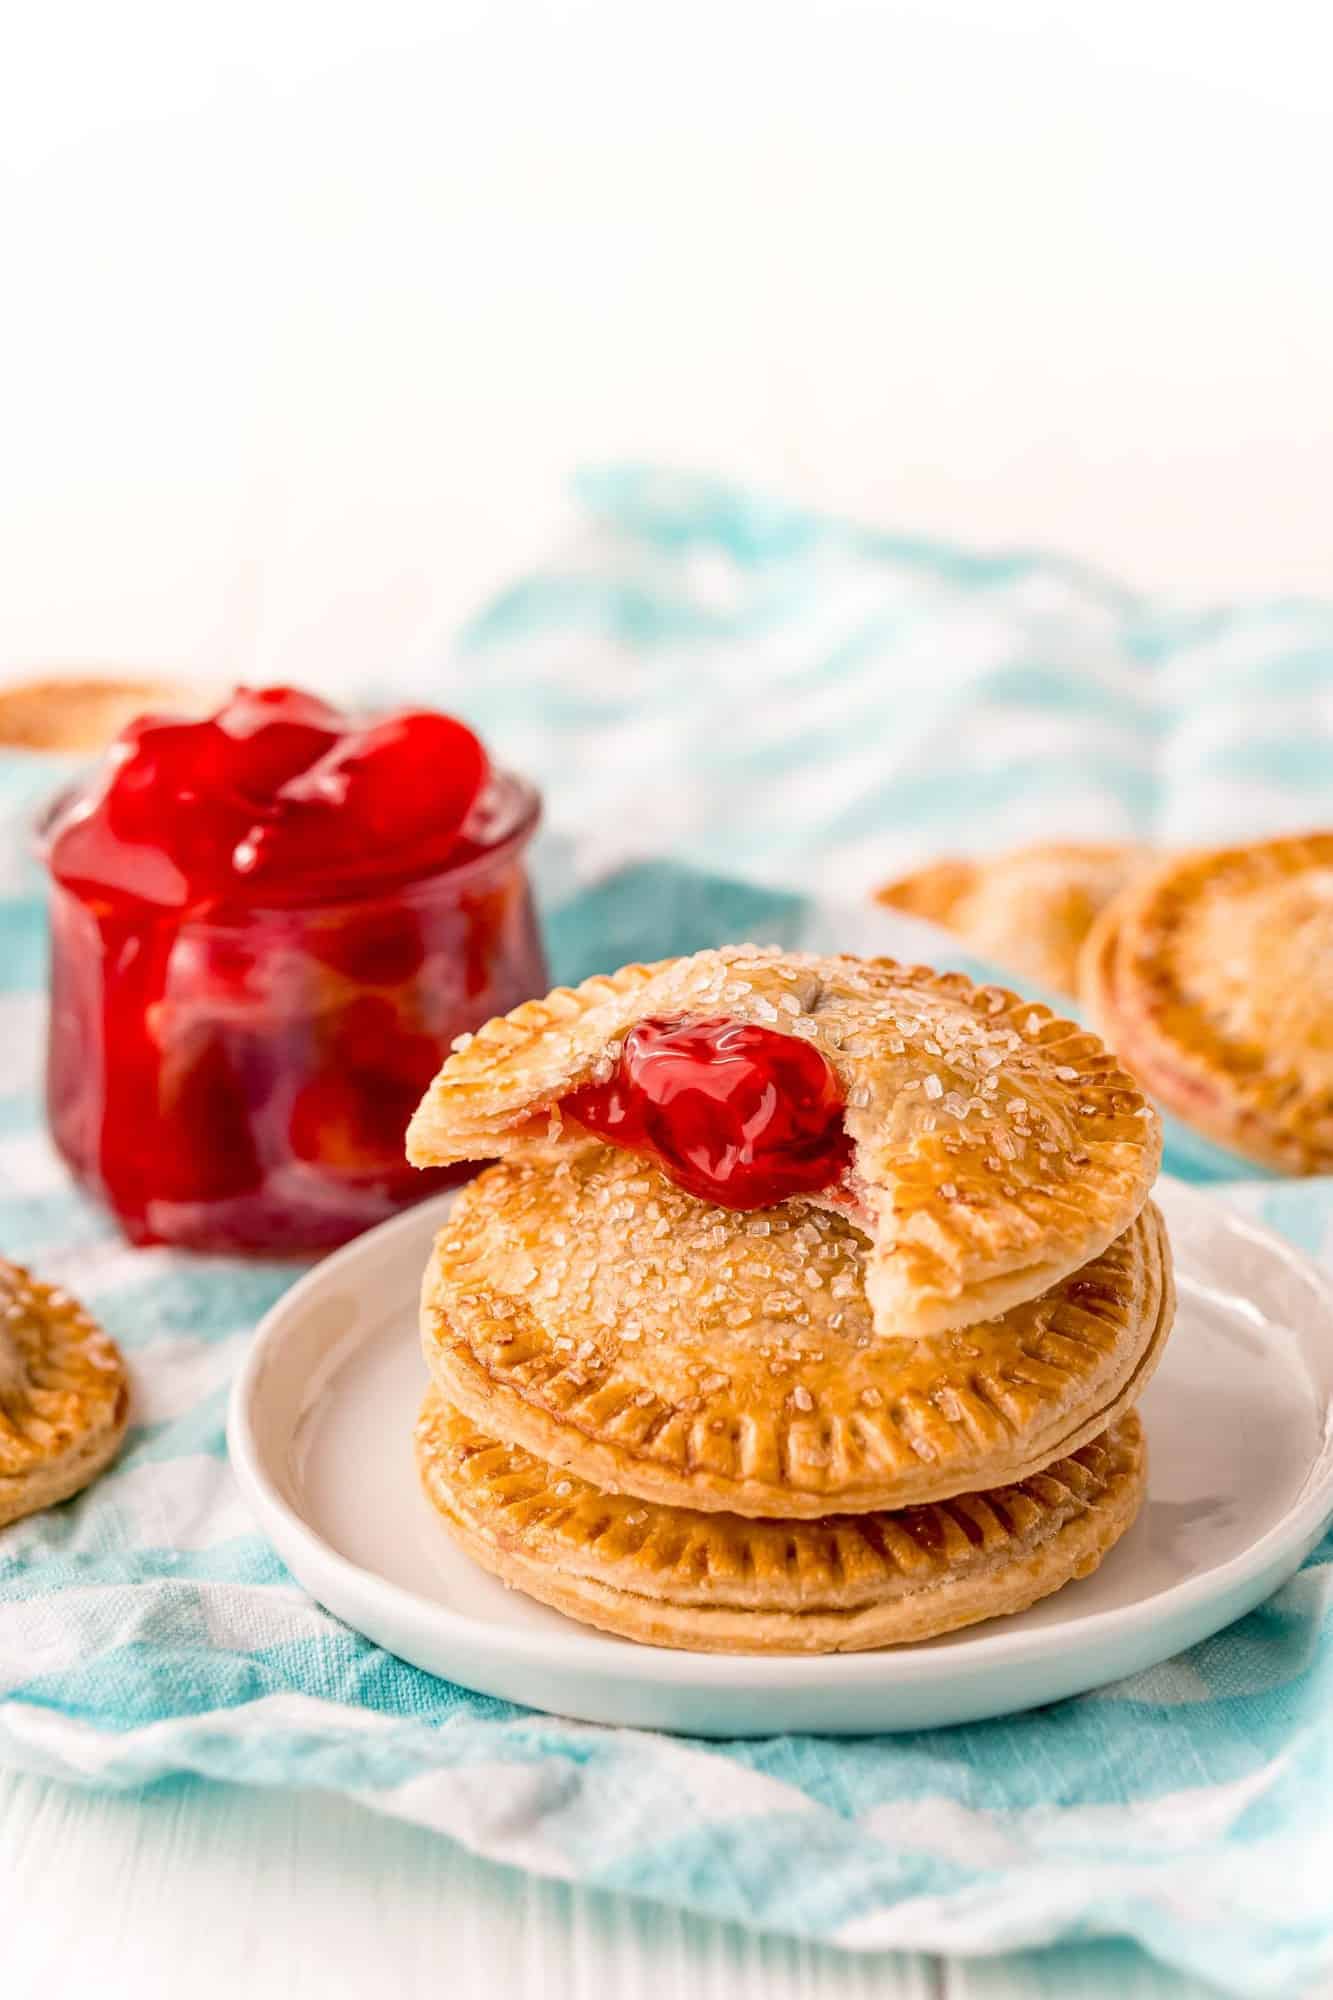 3 hand pies stacked on a plate, one with a bite out of it showing cherry filling.